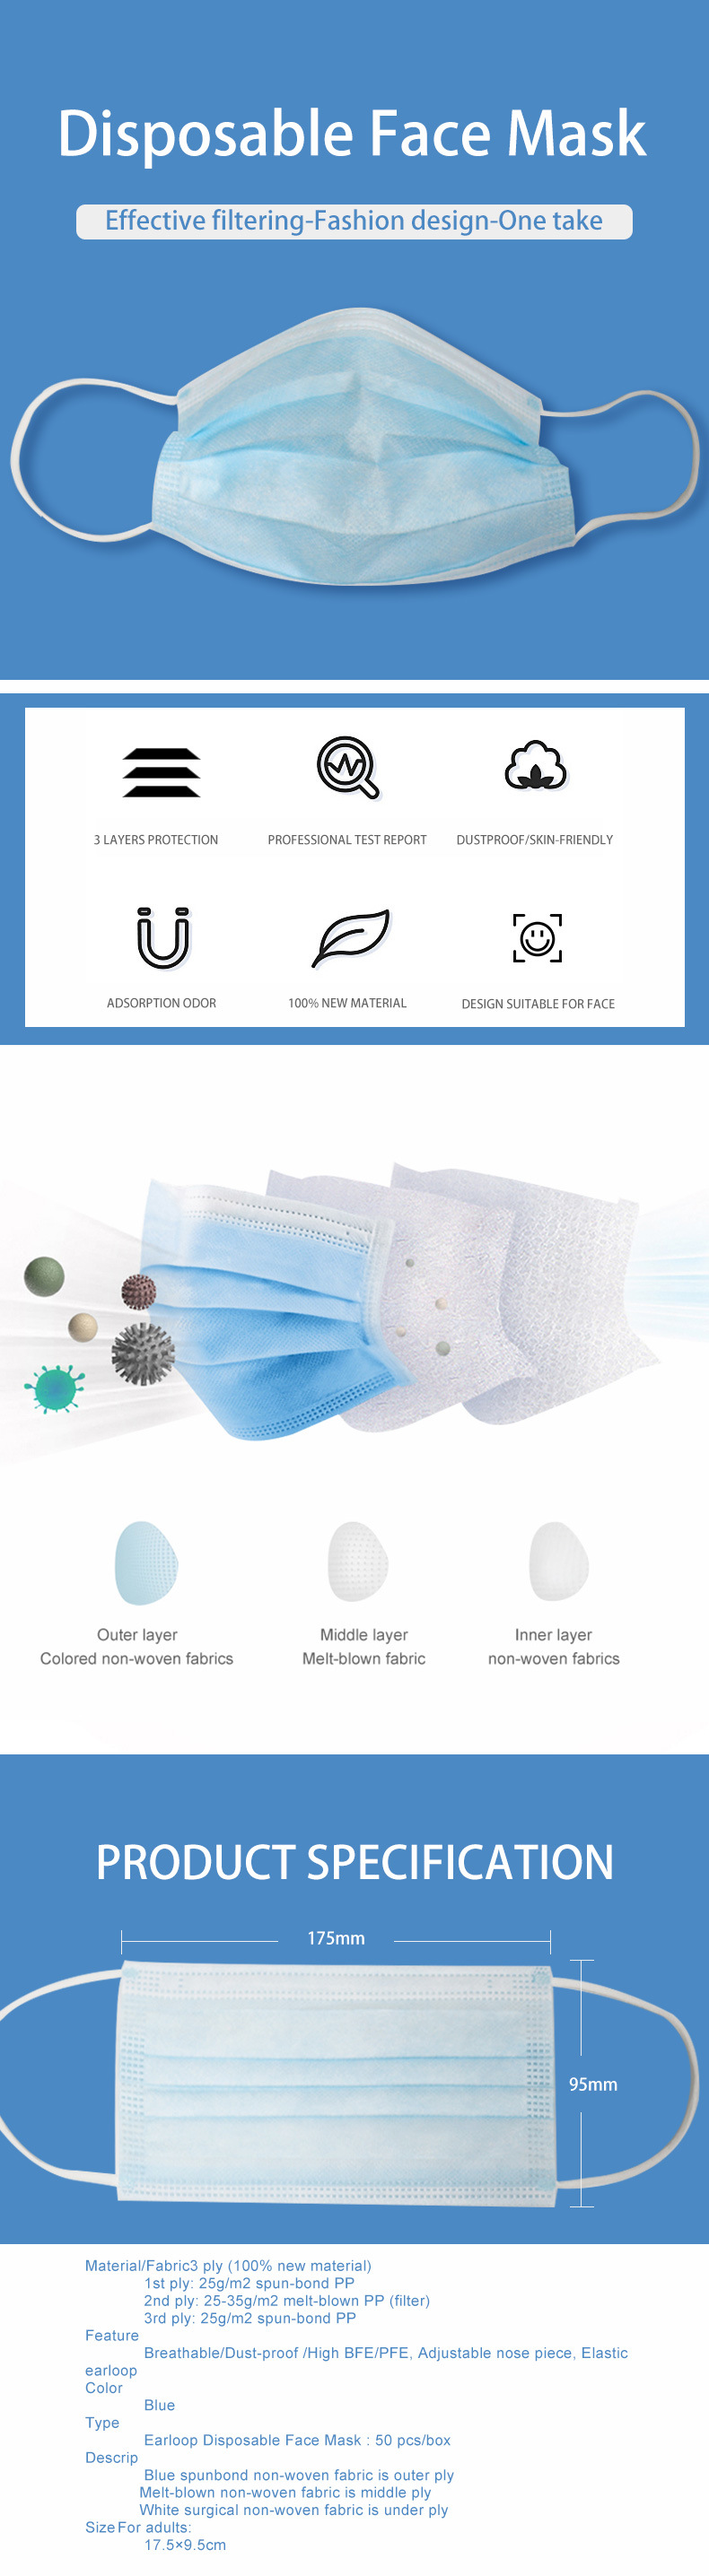 Non Woven Cheapest High Quality Professional Protective 3ply Disposable Face Mask with Earloop in Stock Direct Manufacturer 2021 Mask in Stock China